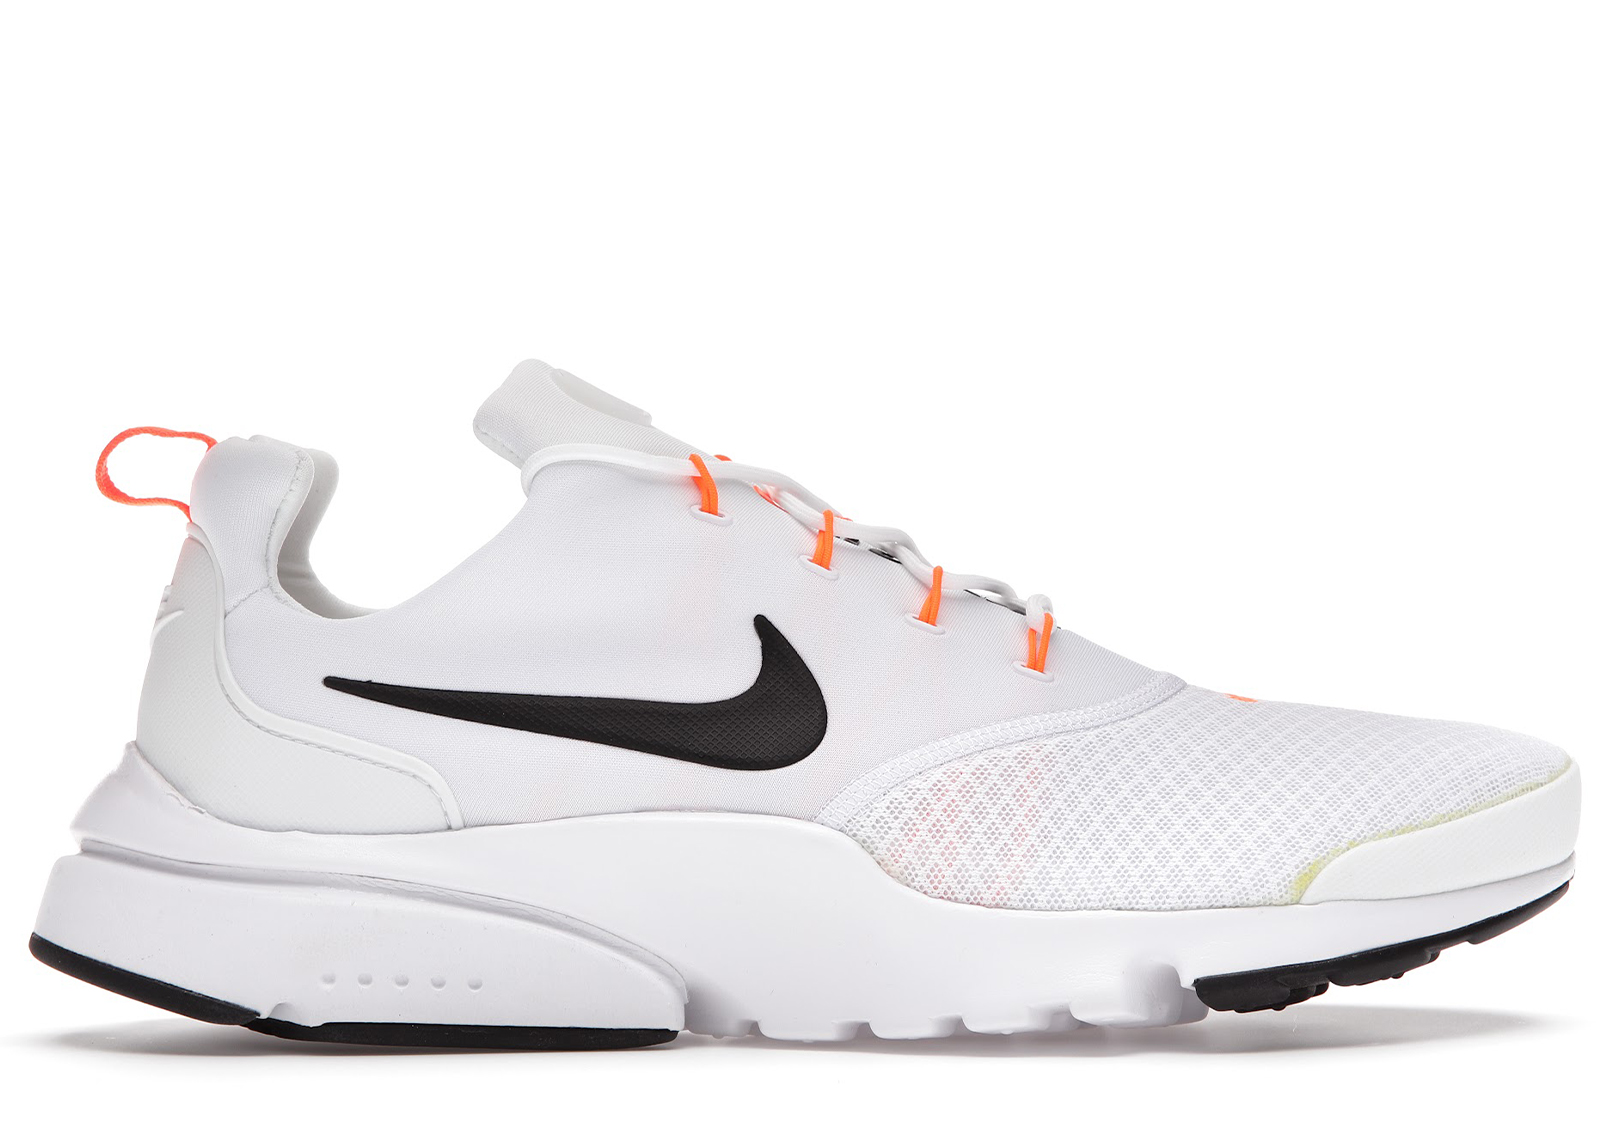 Nike Presto Fly Just Do It Pack White - AQ9688-100